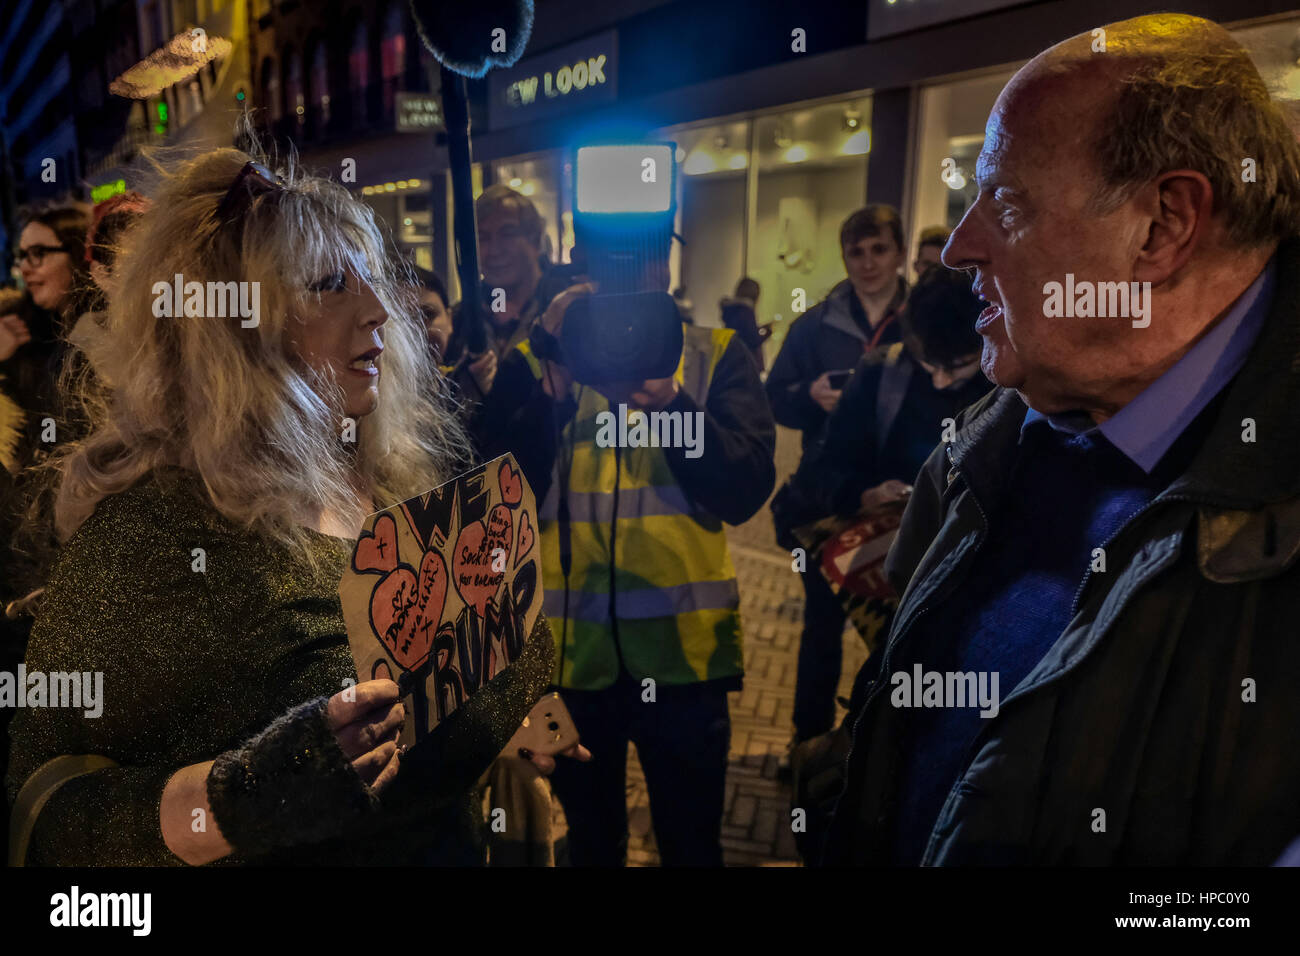 Bournemouth, Dorset, UK. 20 February 2017. Anti Trump demonstrations meet in Bournemouth Square during the national day of action called by the Stop Trump Coalition timed to coincide with the parliamentary debate over Donald Trump’s state visit. A few vocal pro Trump demonstrators attended leading to some heated exchanges . Credit: Tom Corban/Alamy Live News Stock Photo